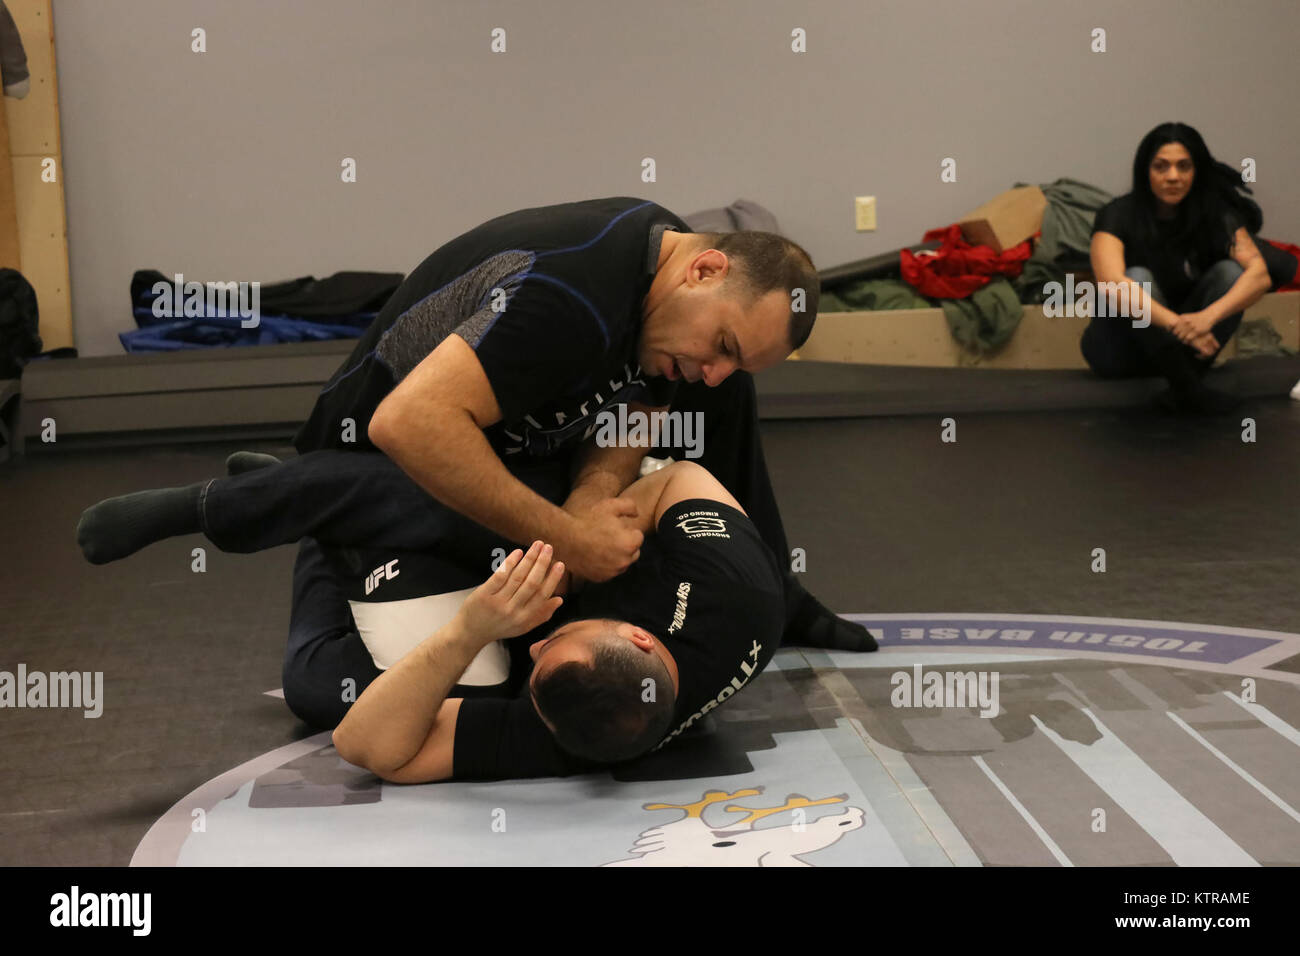 Luigi Mondelli, Brazilian Jiu Jitsu 4th degree black belt, demonstrates ground control and handcuffing techniques on Brazilian Jiu Jitsu brown belt Marcos Borges at Stewart Air National Guard Base, NY, on March 4, 2017. Instructors from American Top Team in Conneticut travel to Stewart Air National Guard Base to teach real-life self defense tactics to Air National Guardsmen. (U.S. Air National Guard photo by Master Sgt. Lee Guagenti) Stock Photo